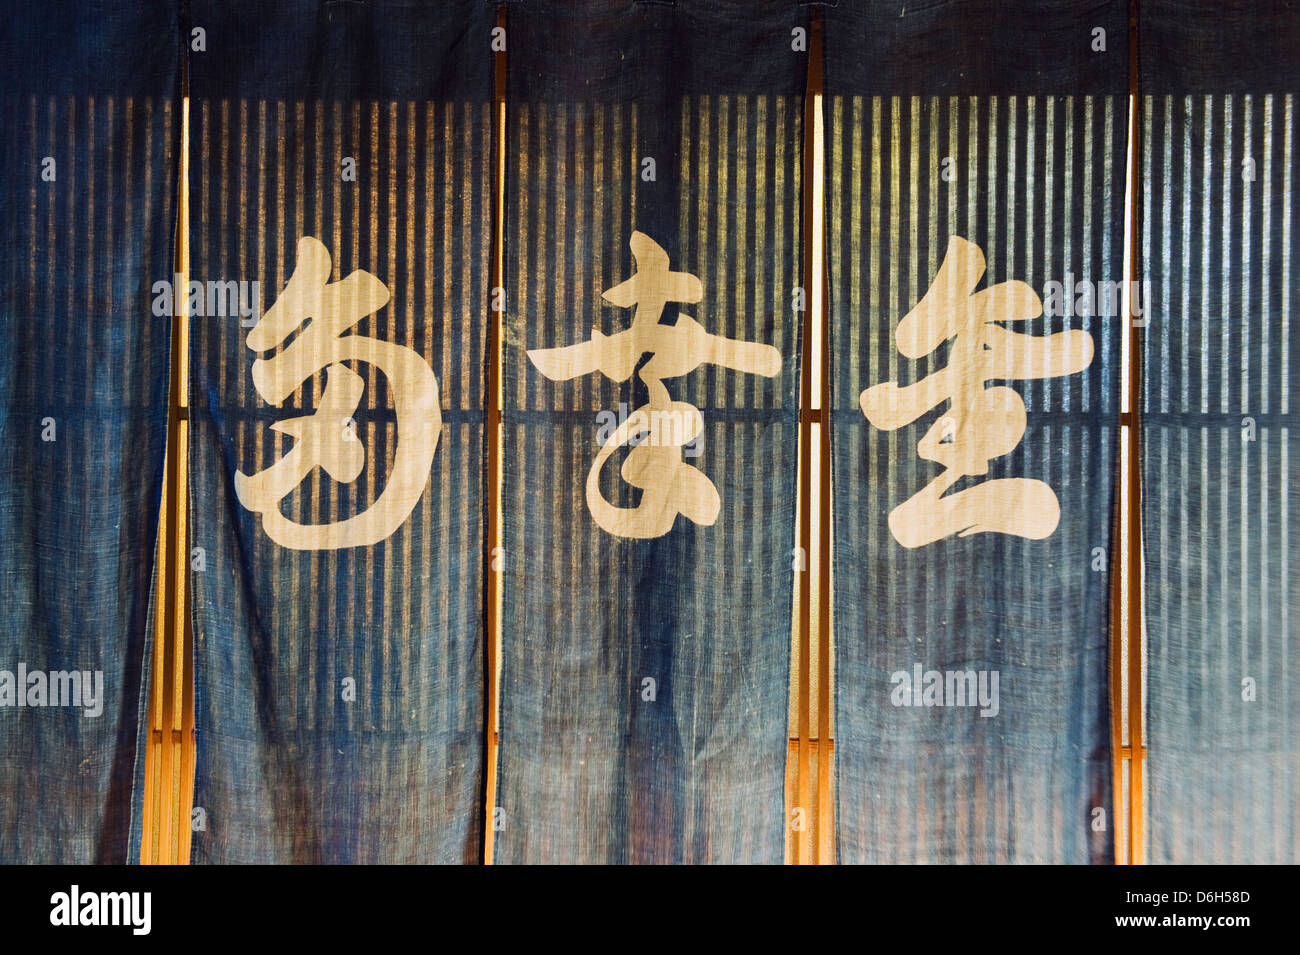 Onsen hot spring bath curtains with Japanese charachters, Kyoto, Japan, Asia Stock Photo